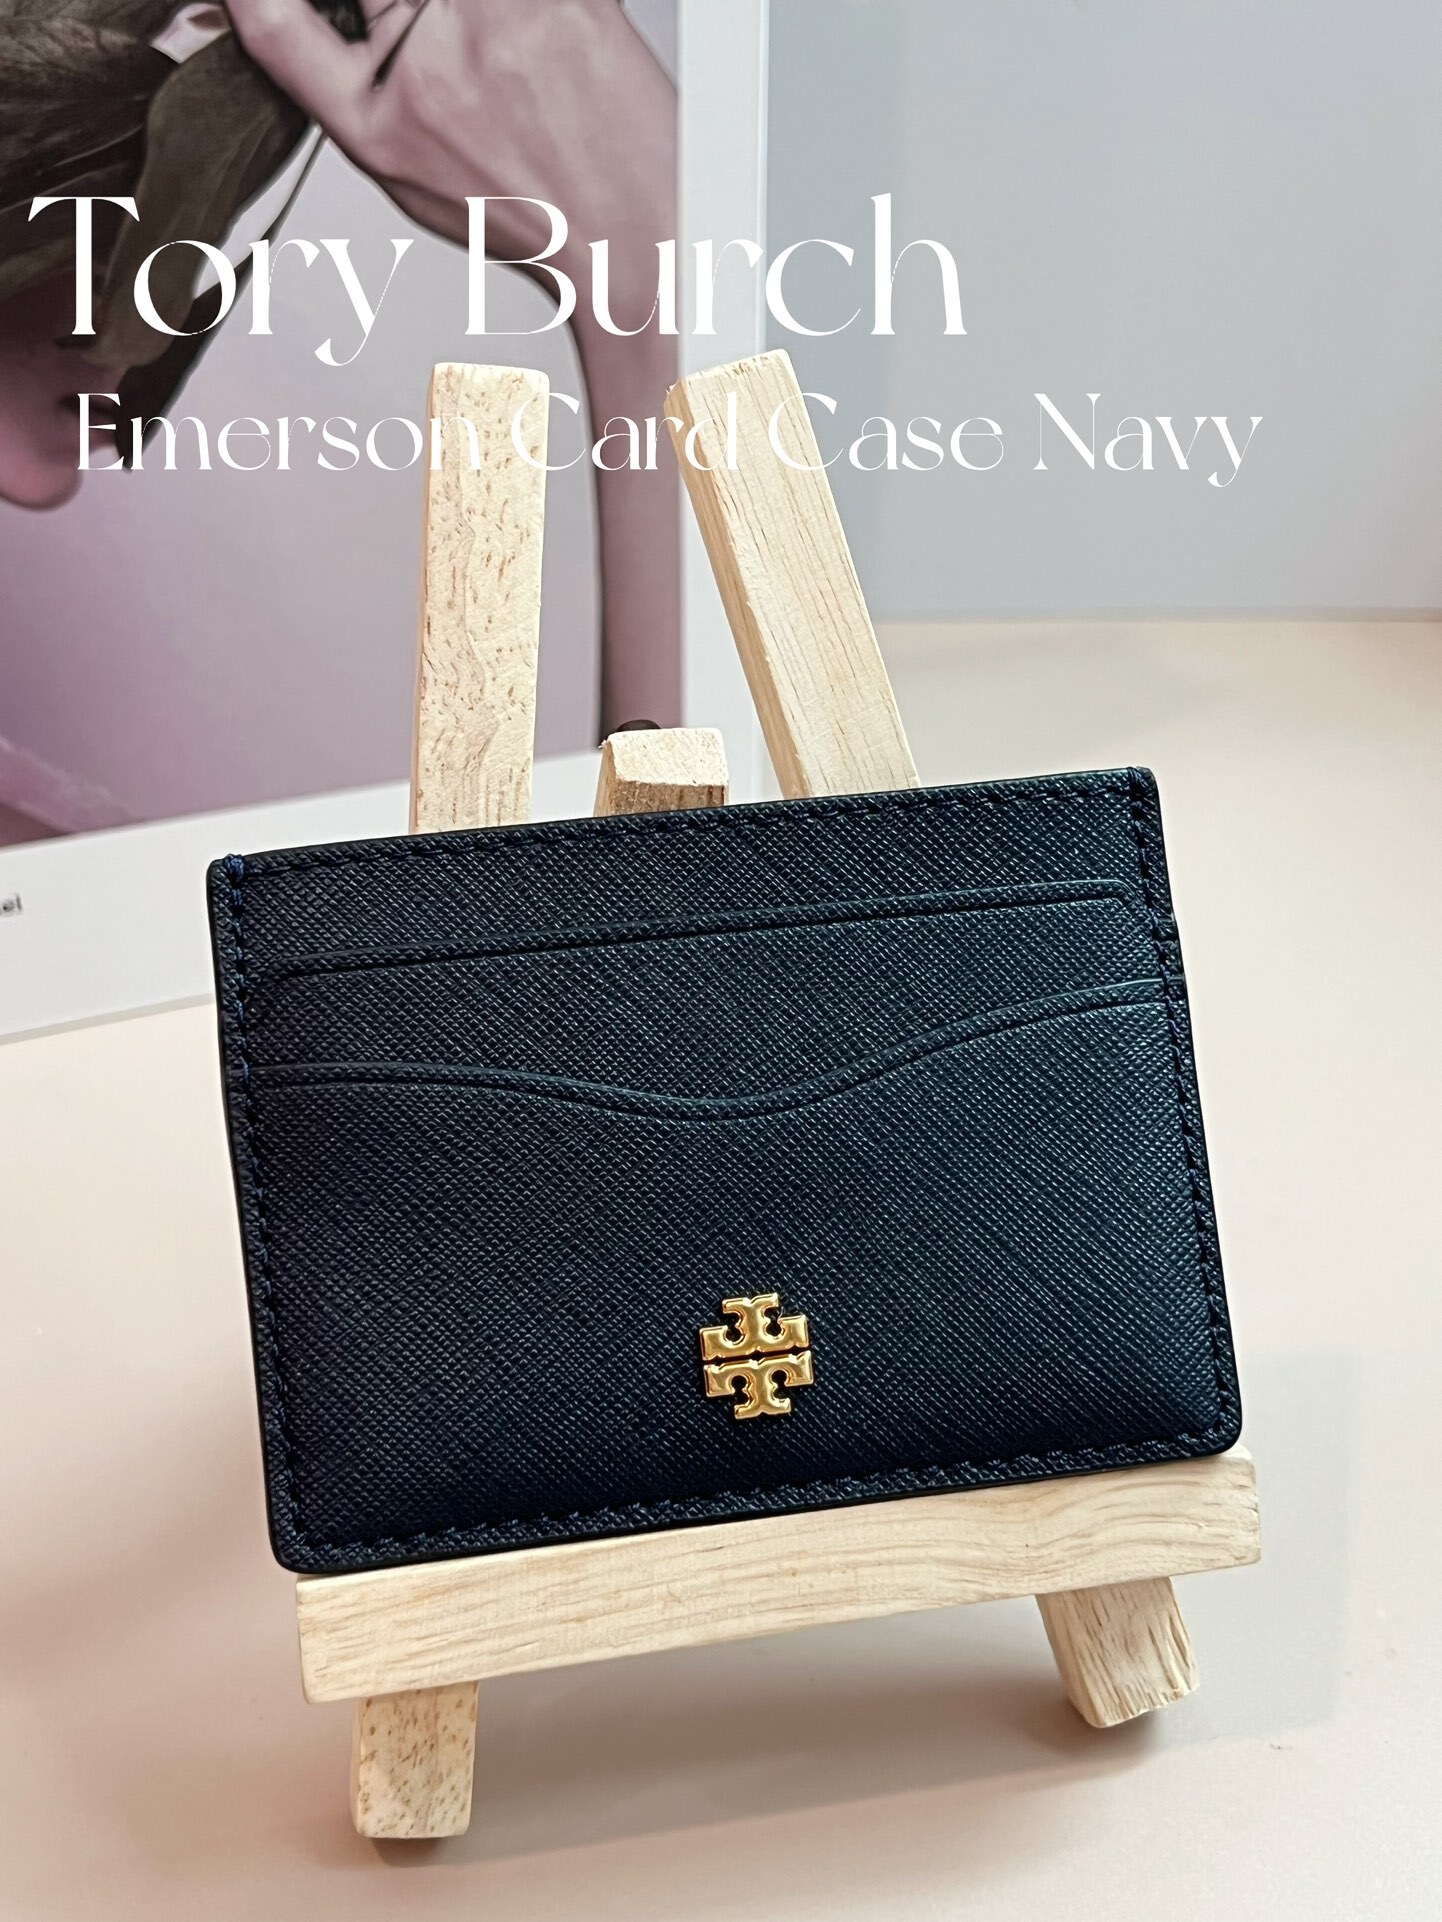 TORY BURCH 1361011022 EMERSON SLIM CARD CASE NAVY – Just A pose Authentic  Purchase (PG04685583-V)